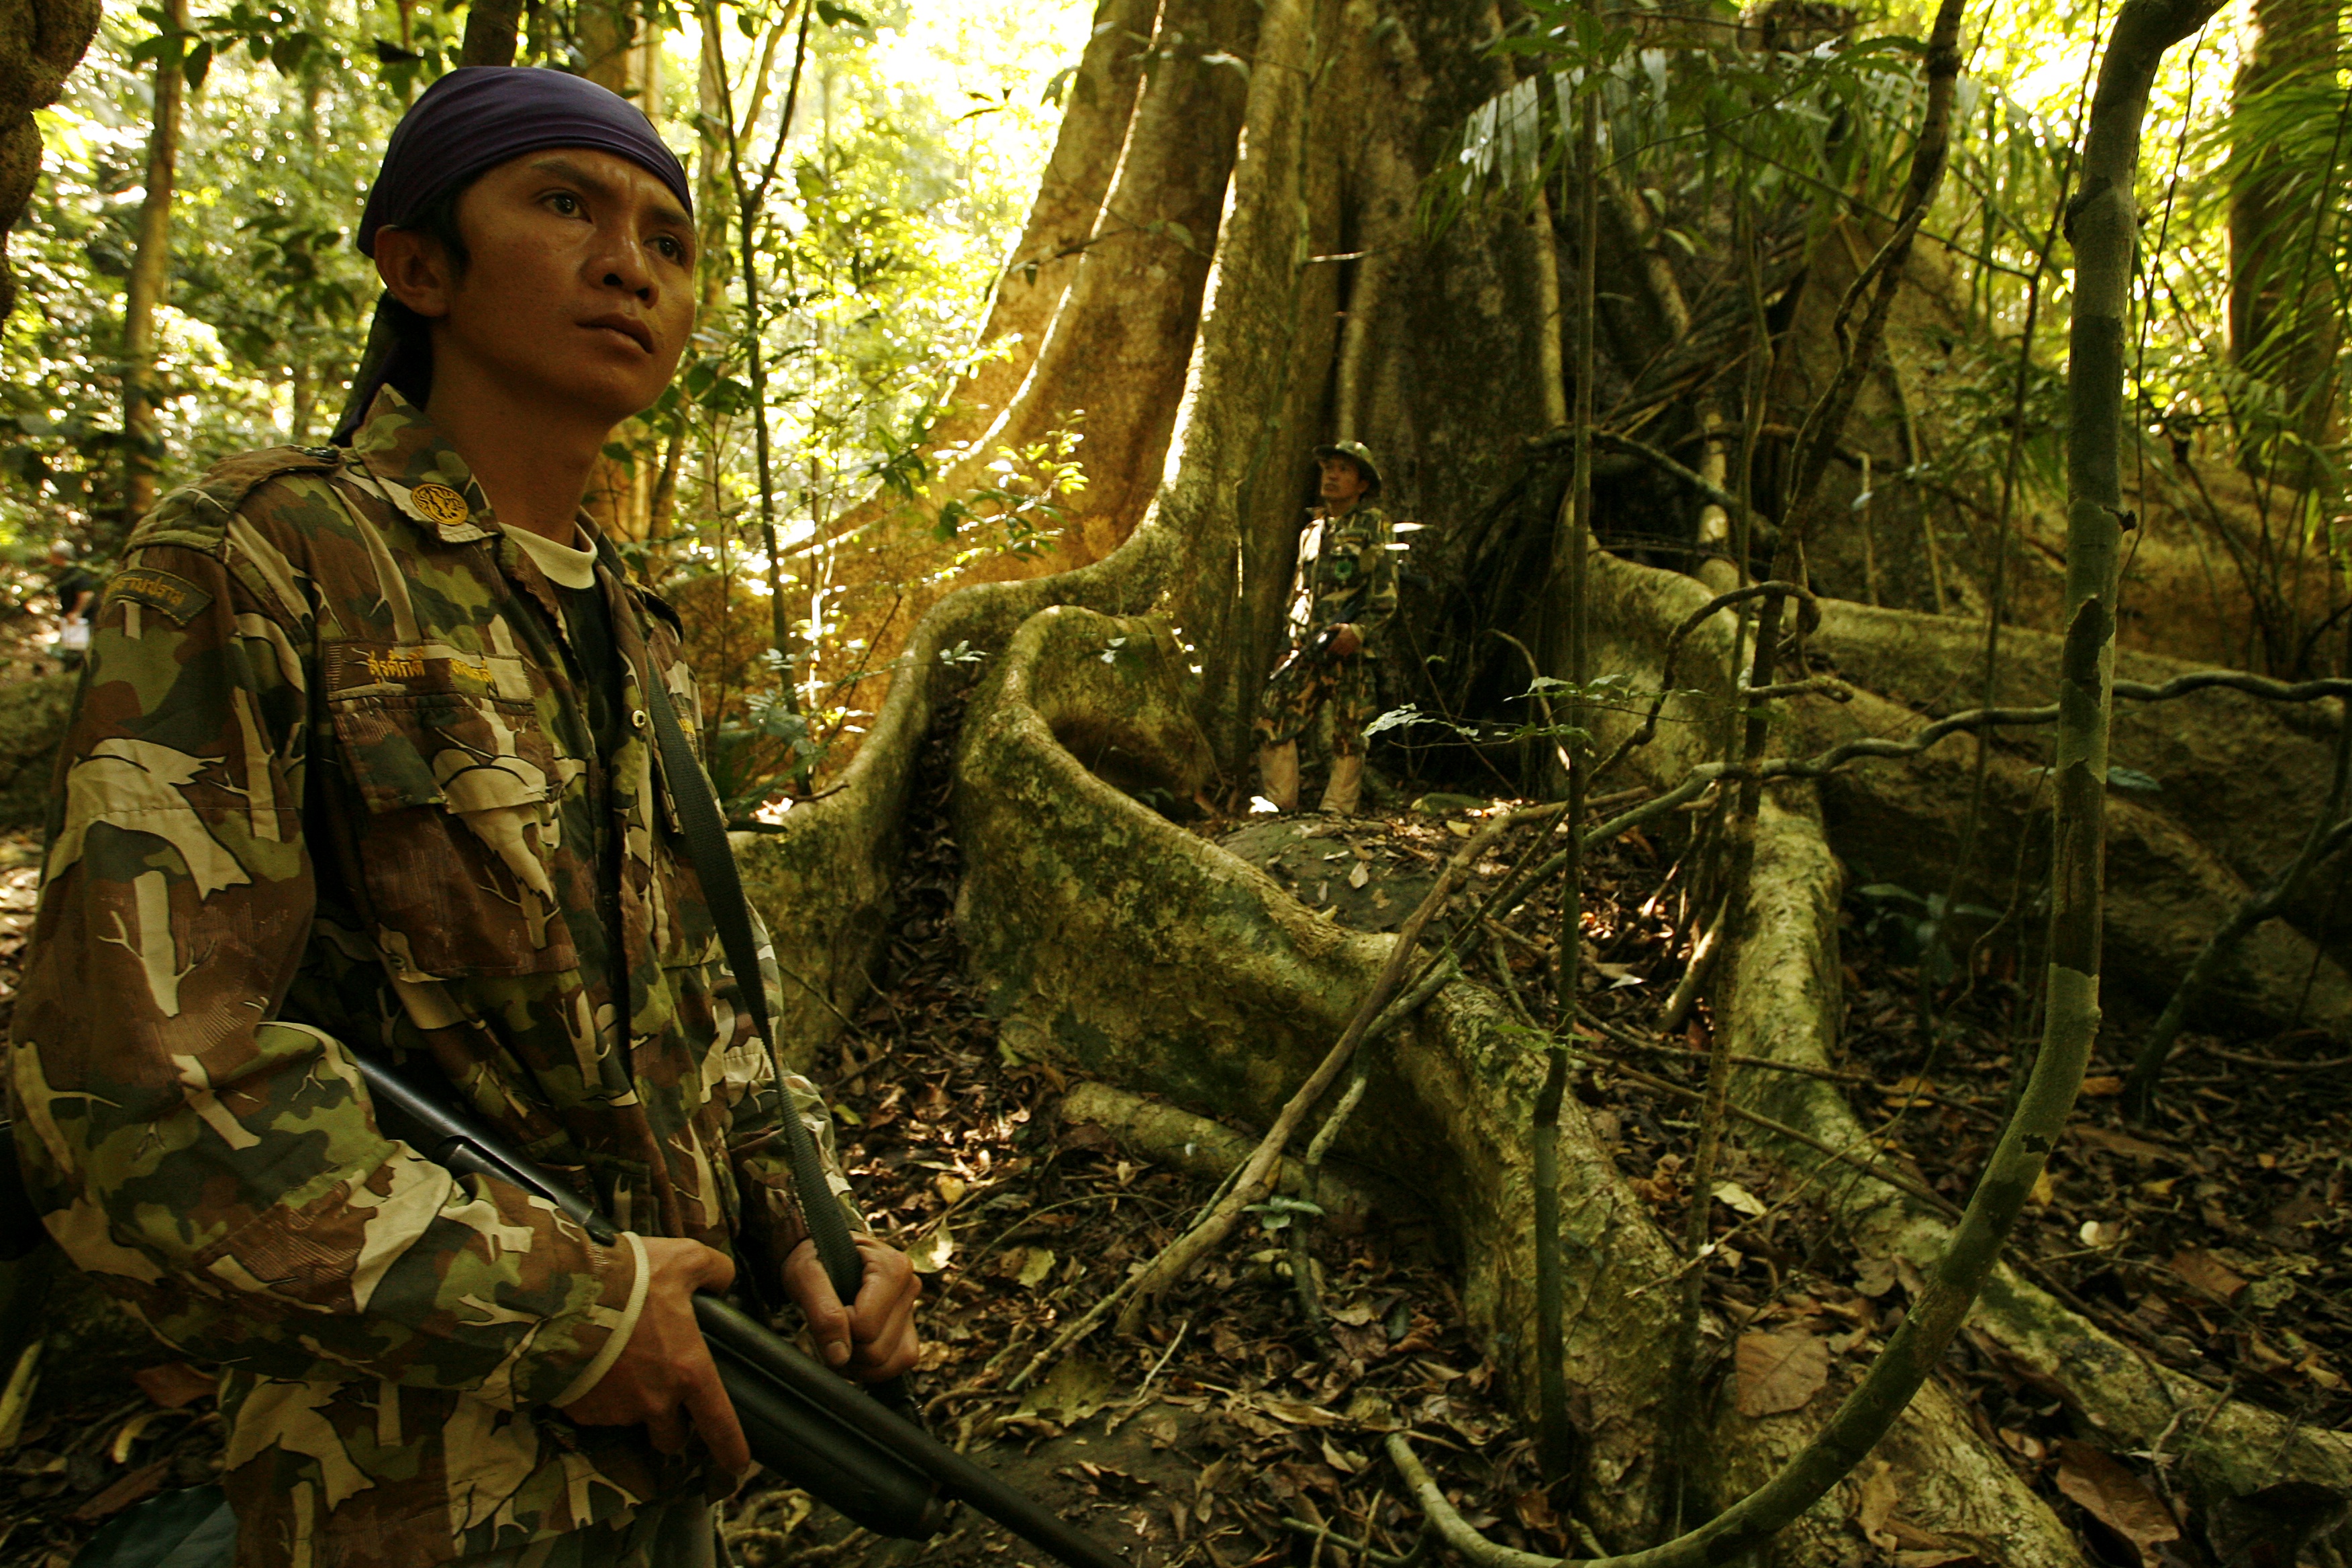 Thai rangers are seen in Khao Yai National Park in February 2008 (Patrick Aventurier—Gamma-Rapho/Getty Images)